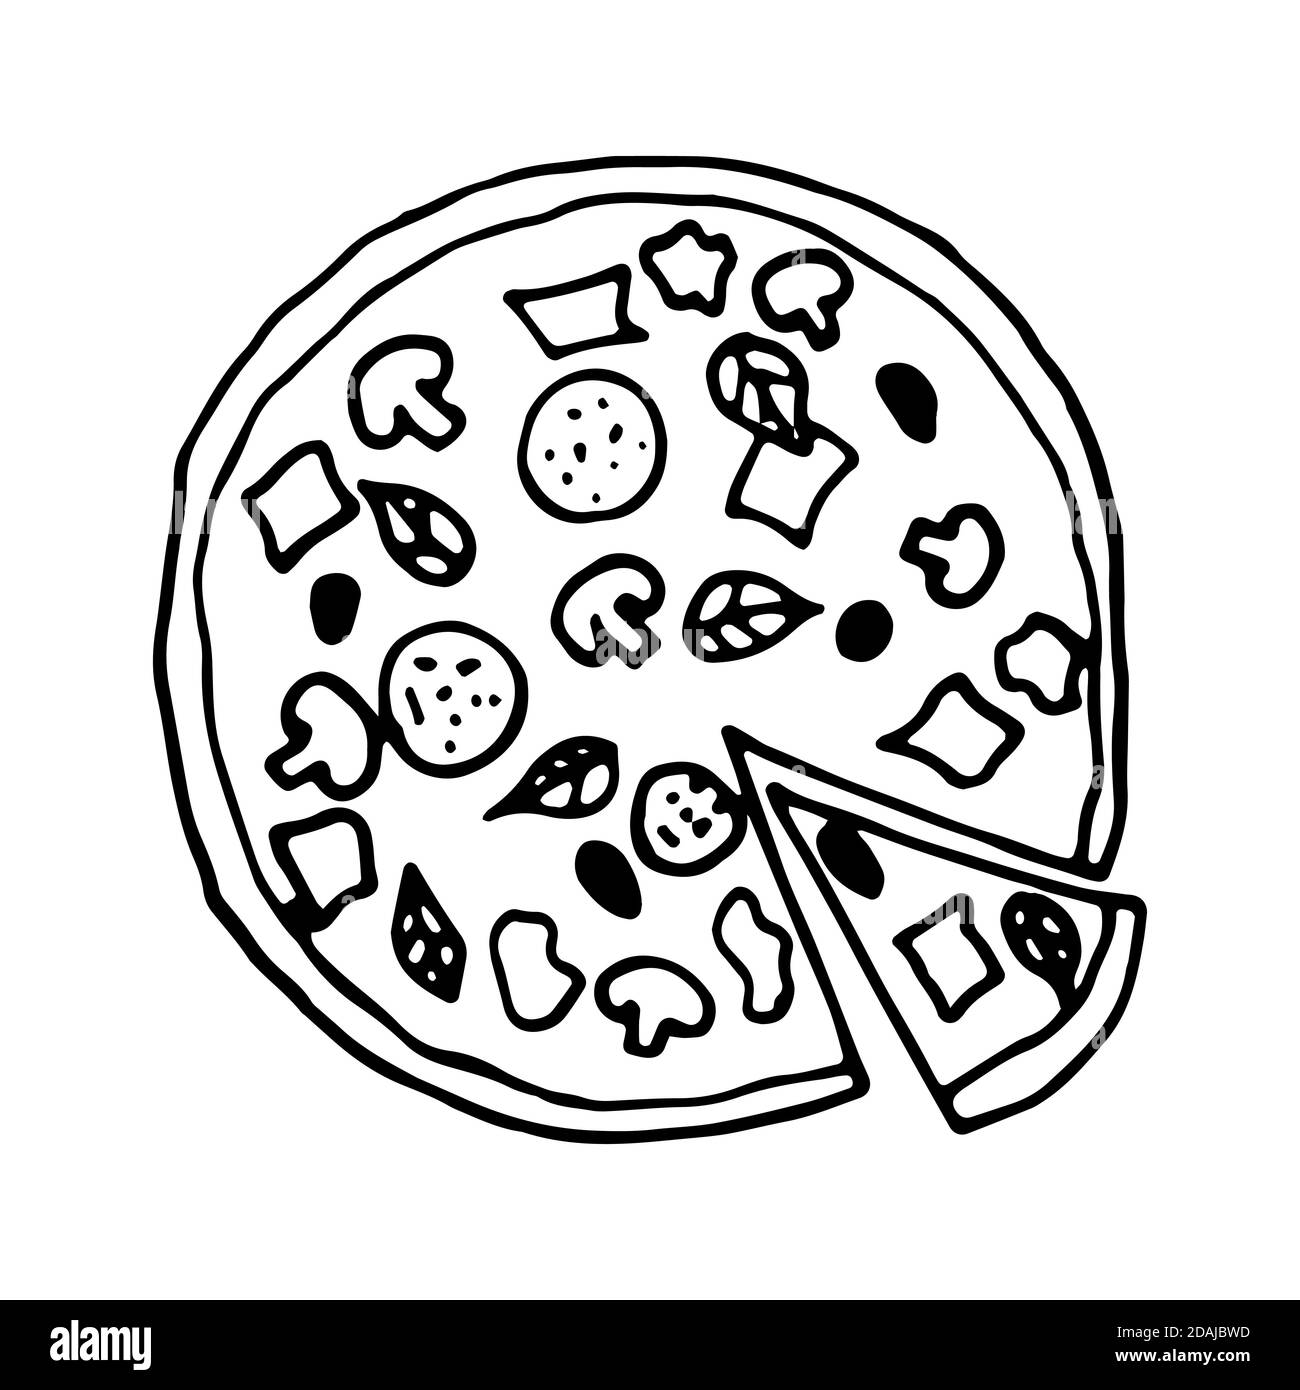 Downloadable Pizza Peel / Paddle Outlines Pack of 10 Drawings 